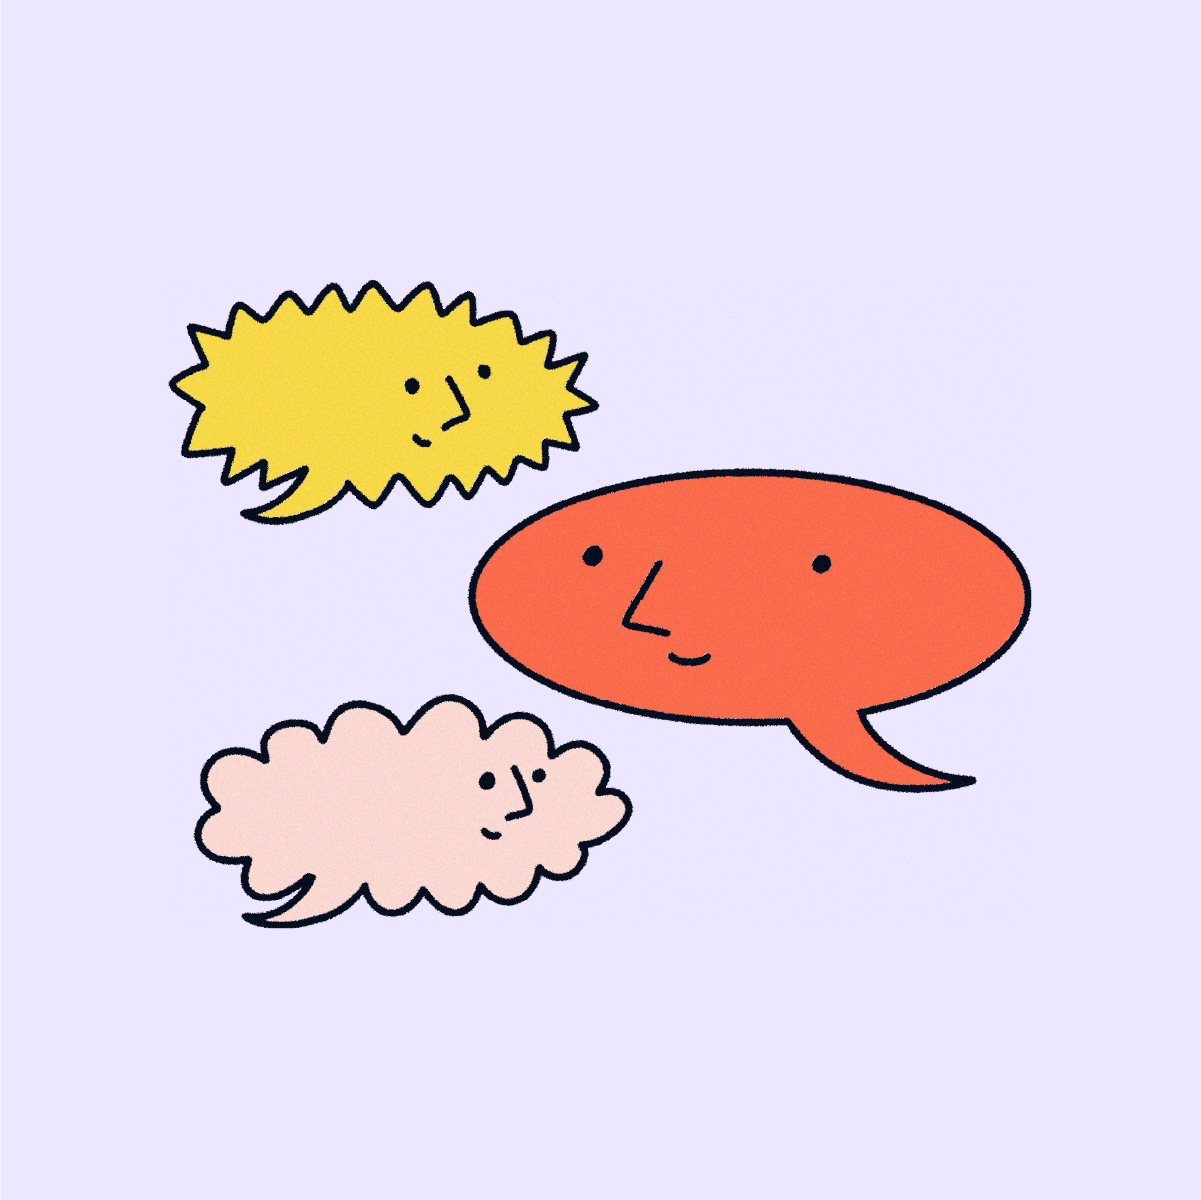 Illustrated speech bubbles with happy faces